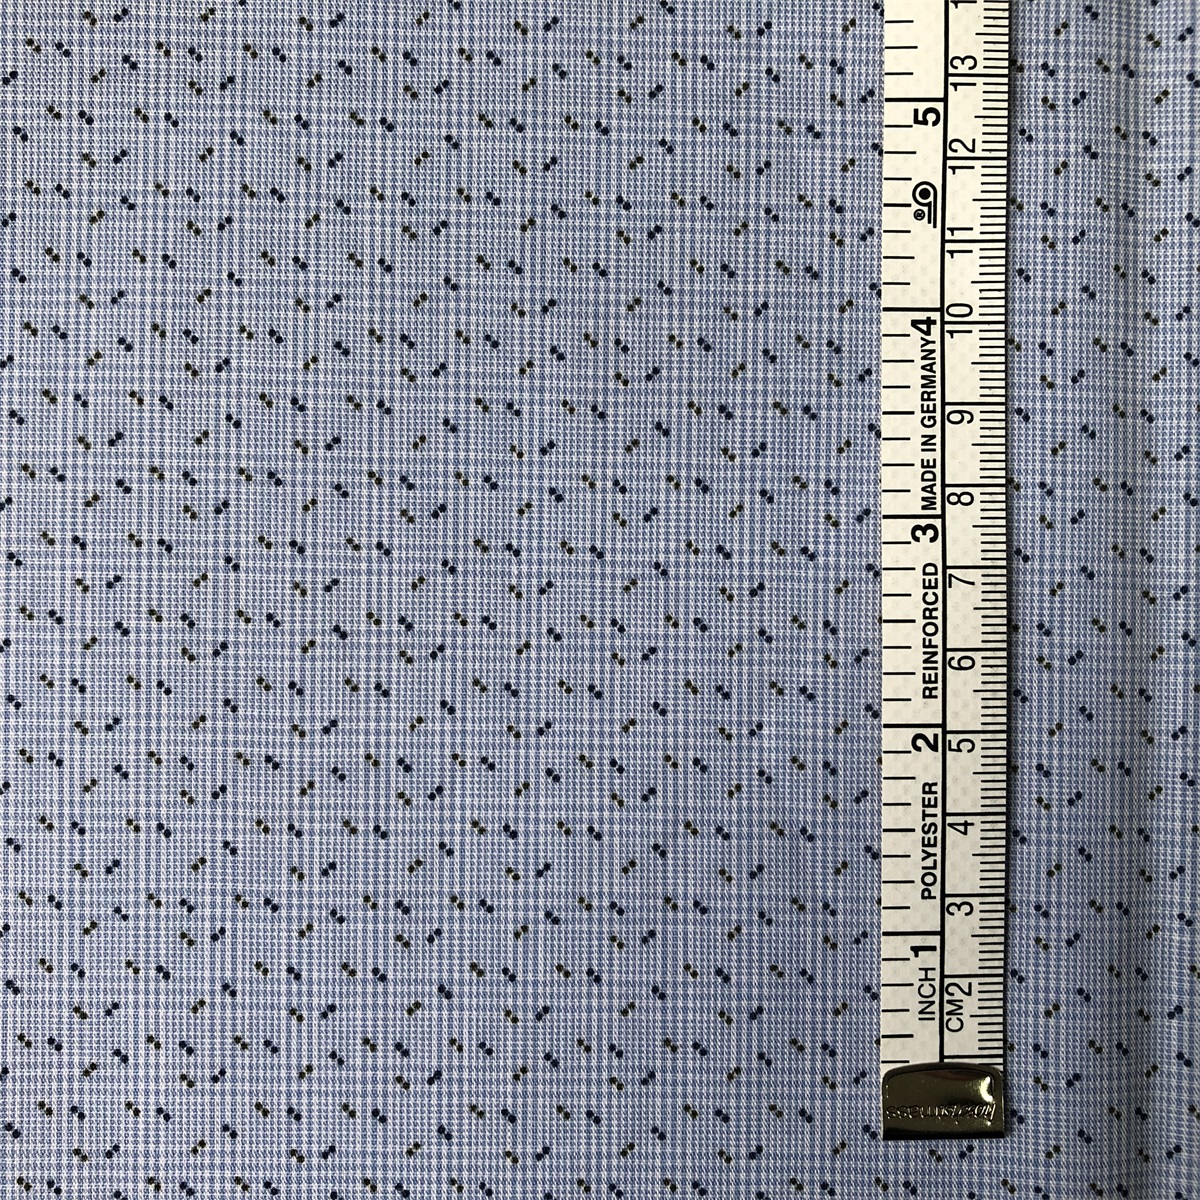 Customized pattern Cotton Fabric for men's casual shirts 100% cotton printed on yarn dyed plain check woven shirts fabric